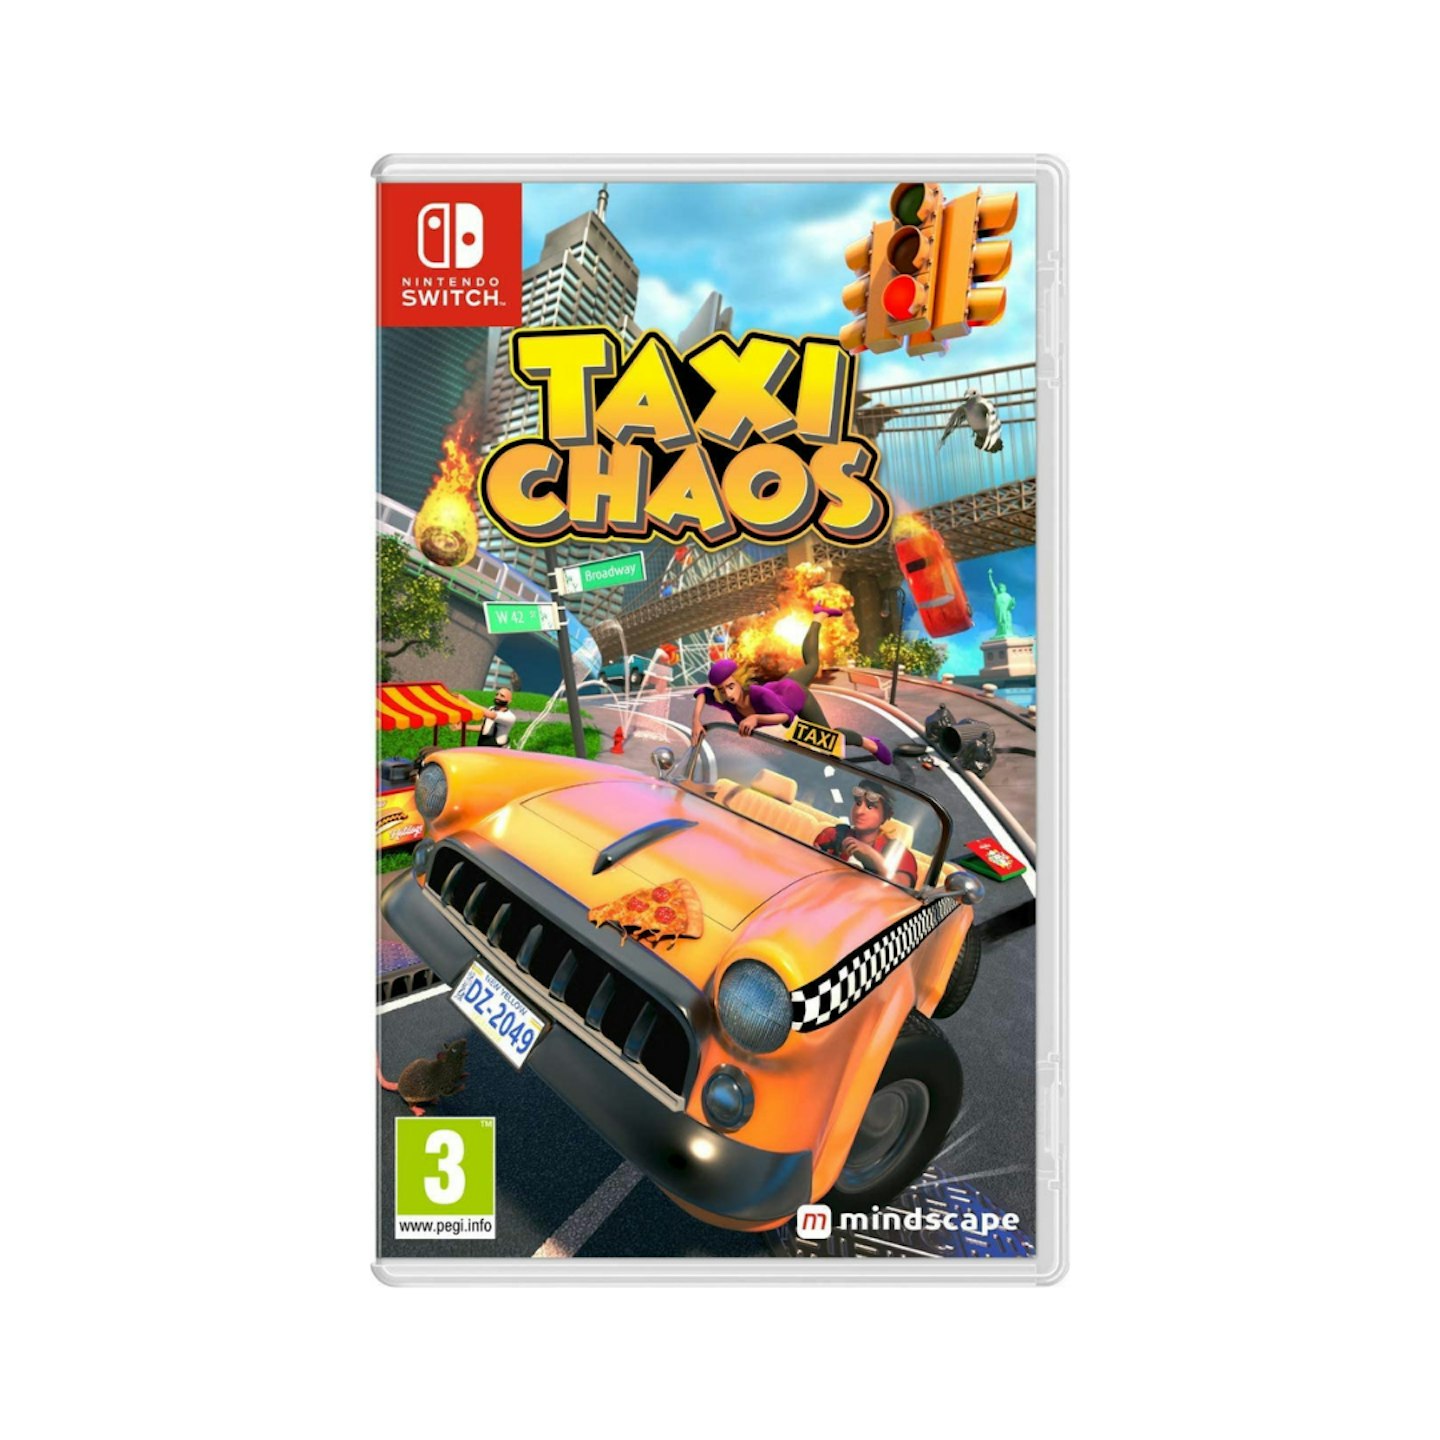 Taxi Chaos on Nintendo Switch